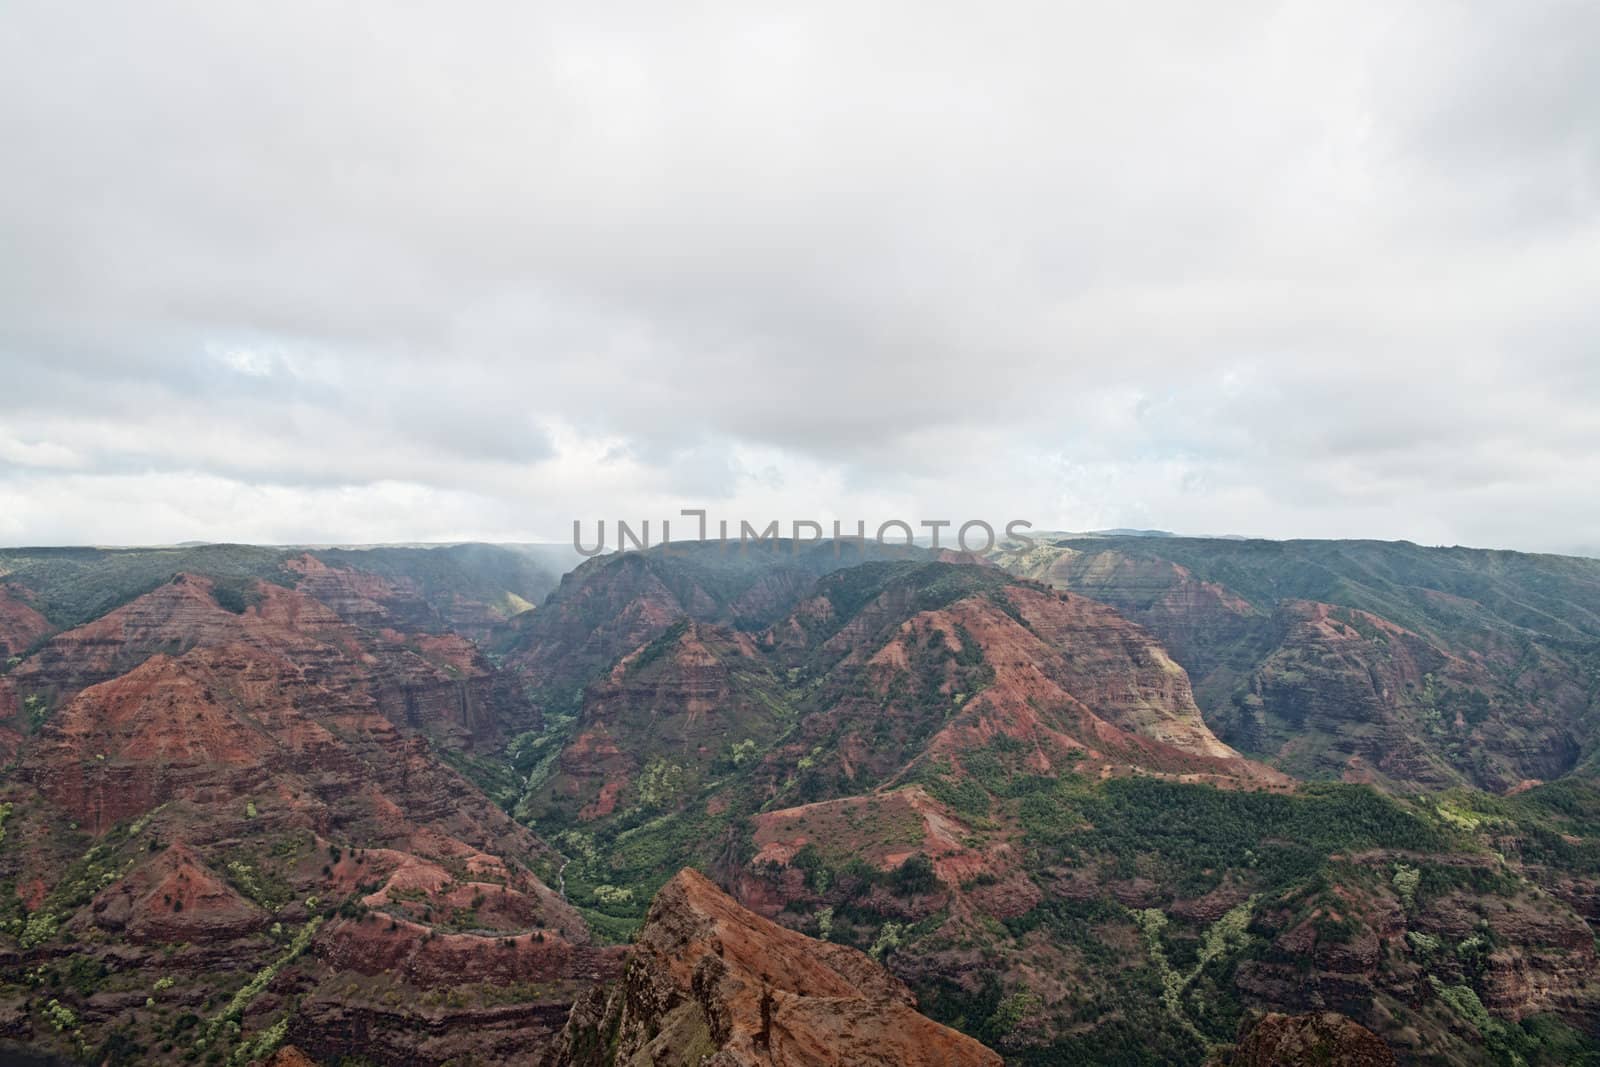 View into the Waimea Canyon on Kauai, Hawaii (the "Grand Canyon of the Pacific"). HDR image processed out of 5 differently exposed images